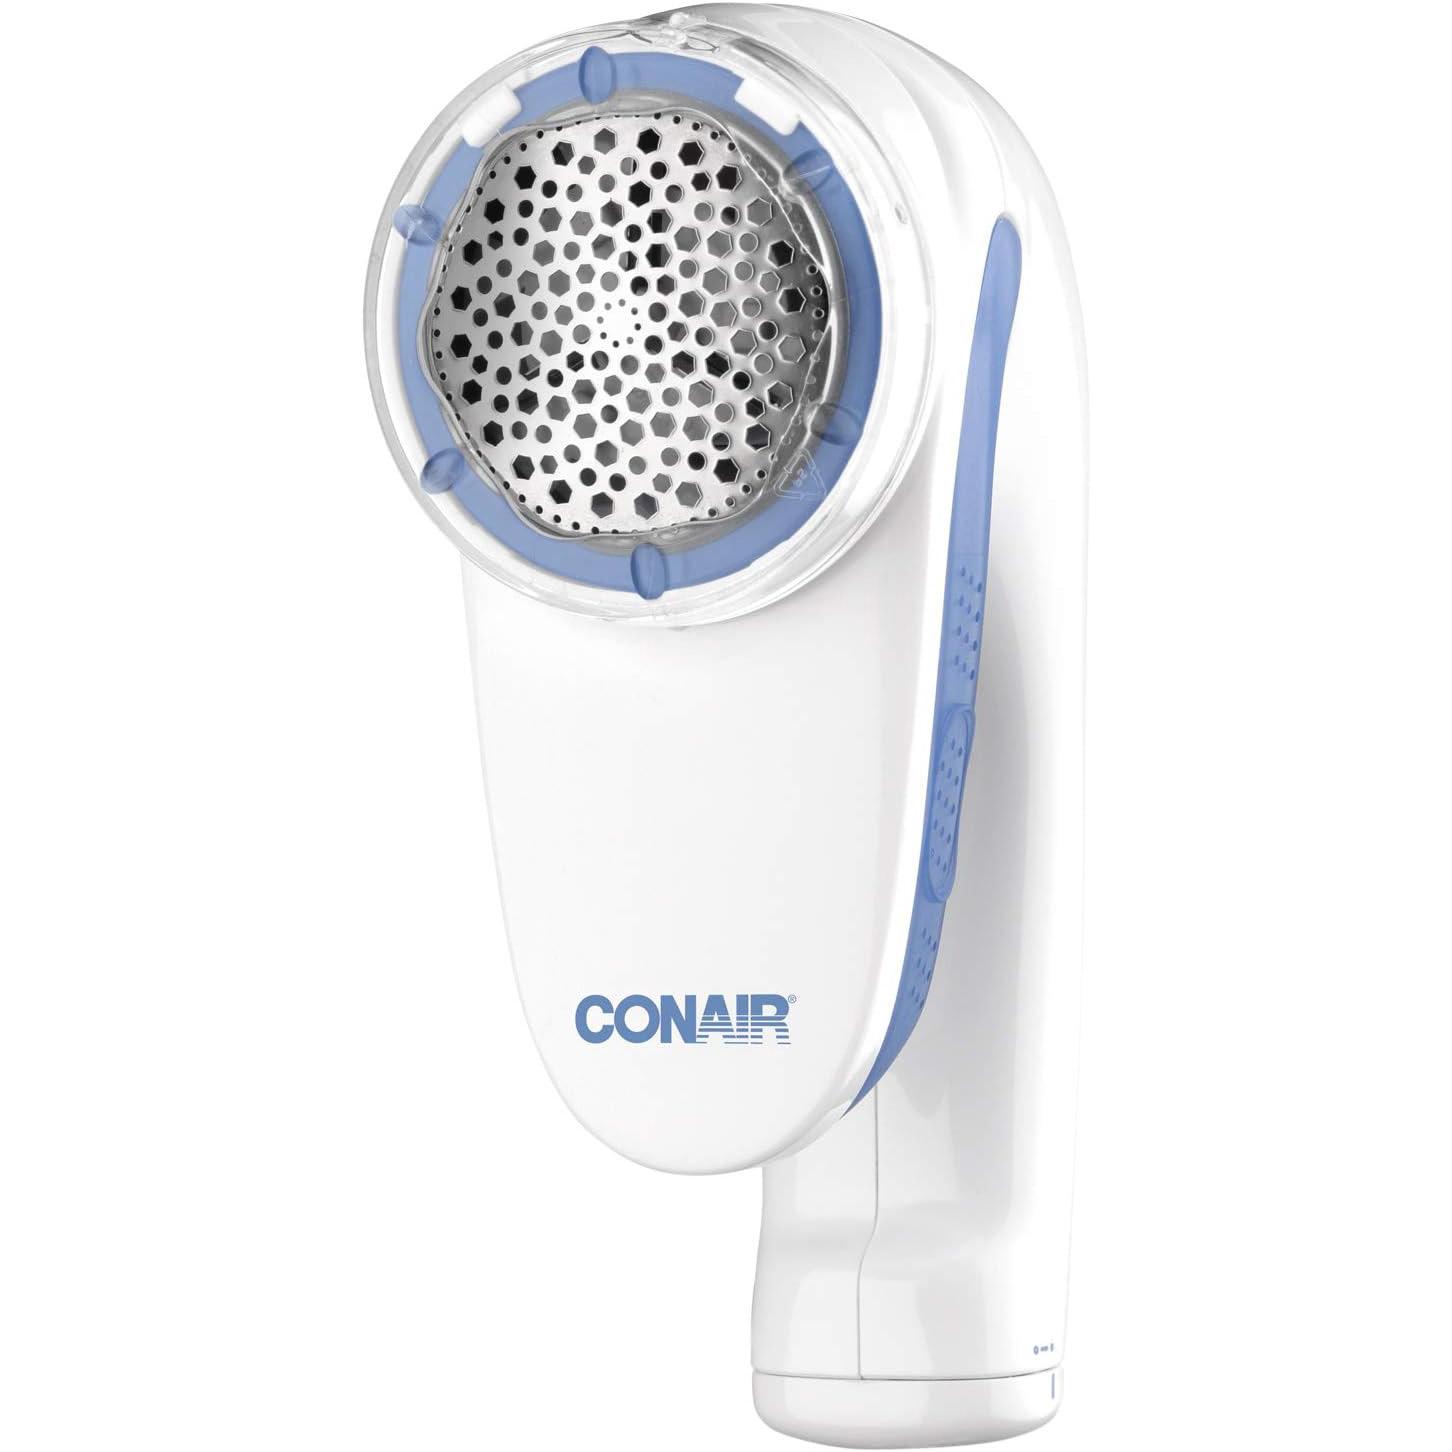 Conair Fabric Shaver and Lint Remover for $9.99